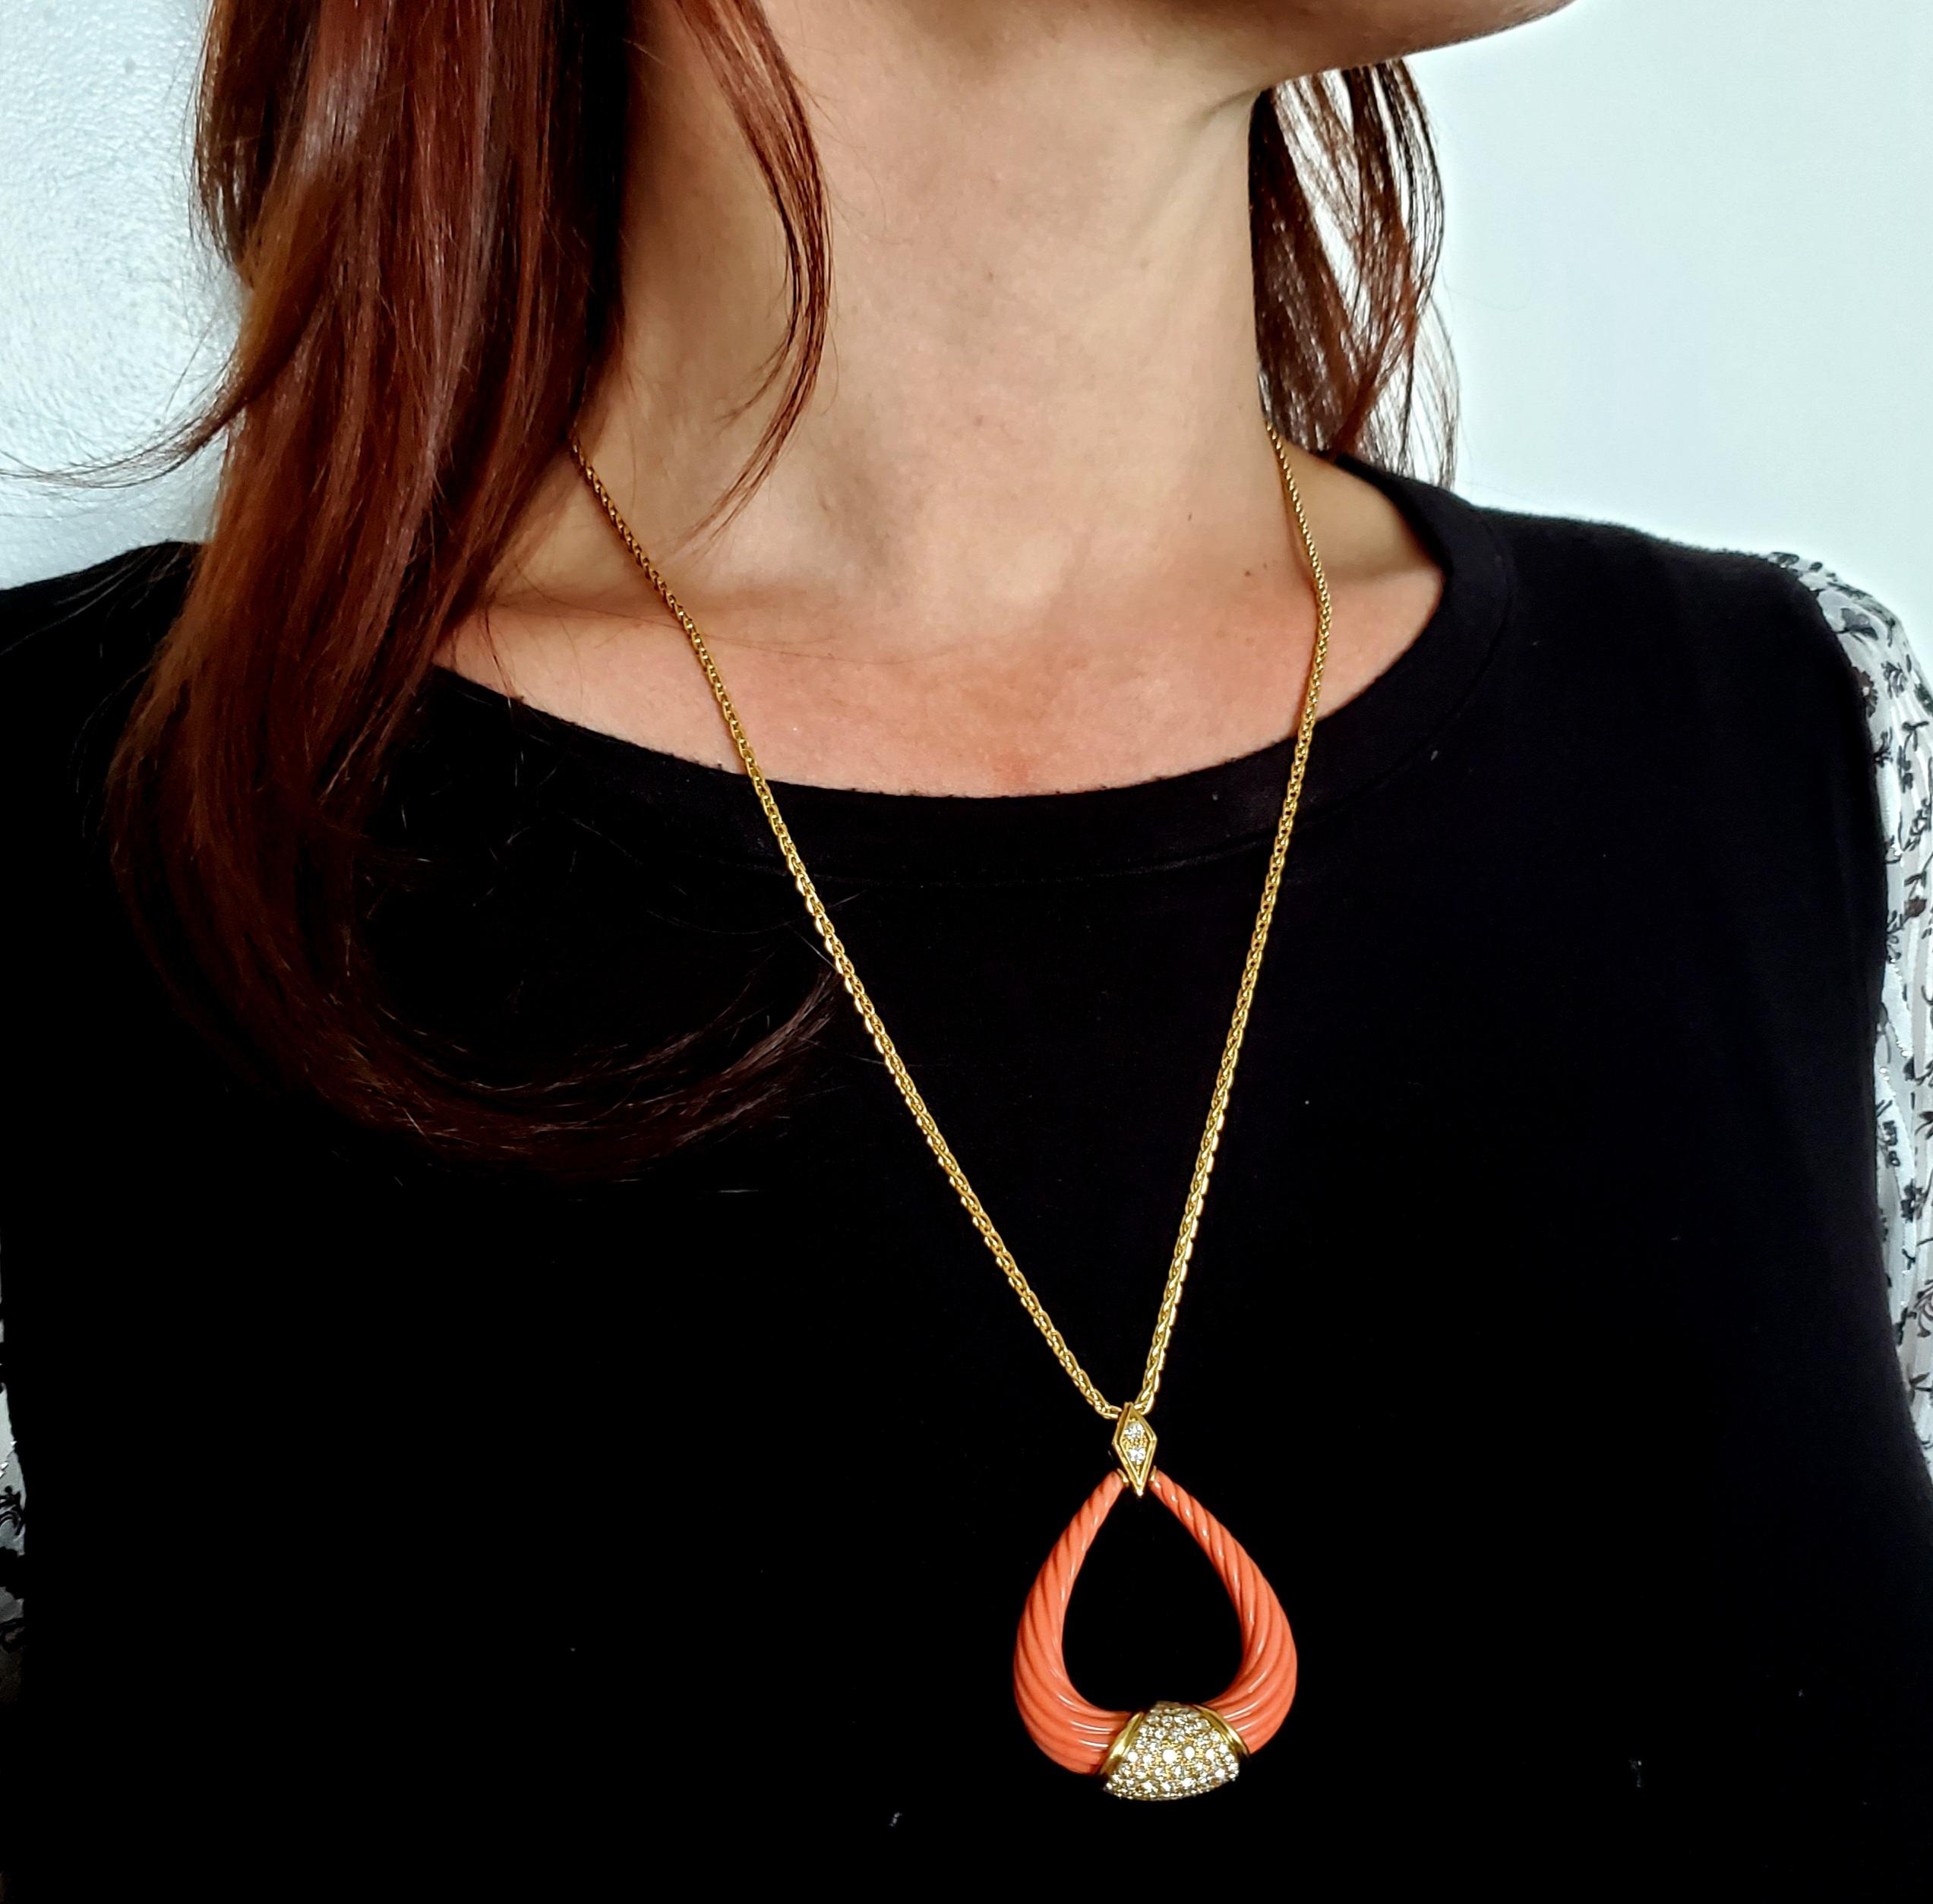 Classic fluted pendant necklace with coral and diamonds.

An statement piece, created in Italy back in the 1970's. This modernist pendant necklace was crafted in solid rich yellow gold of 18 karats with high polished finish and fitted with a diamond